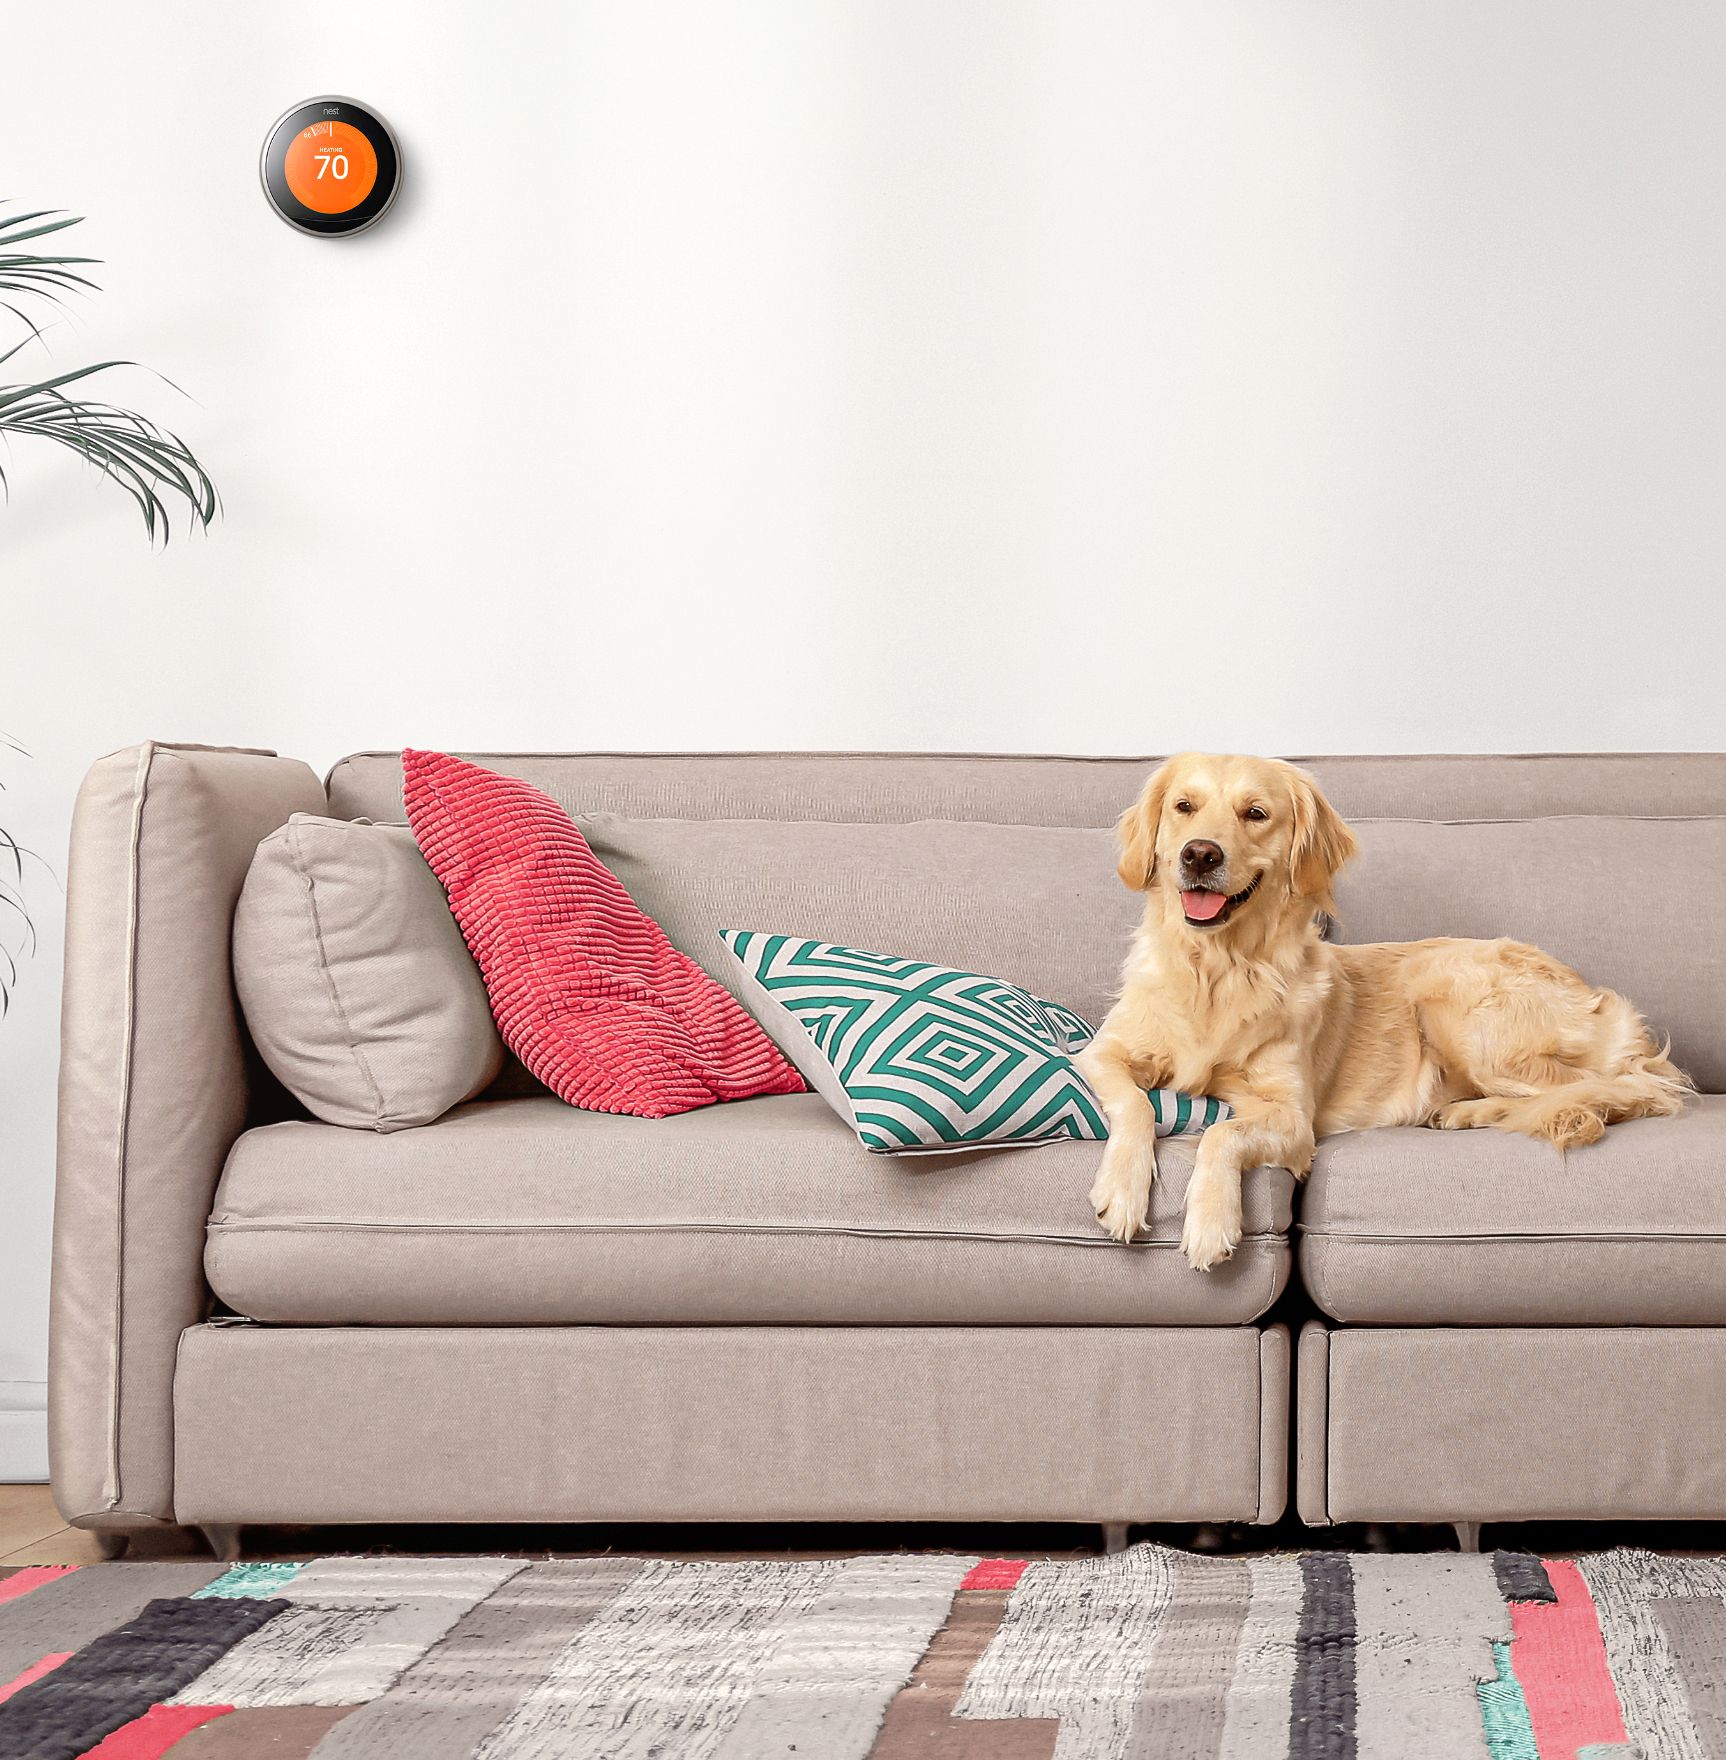 A dog is sitting on a sofa. There is a thermostat on the wall, a plant at the left corner and a lamp at the right corner. An alert pops out with the title: 'Energy usage alert' and its message content reads: 'Congrats! You've met your energy conservation goal.'